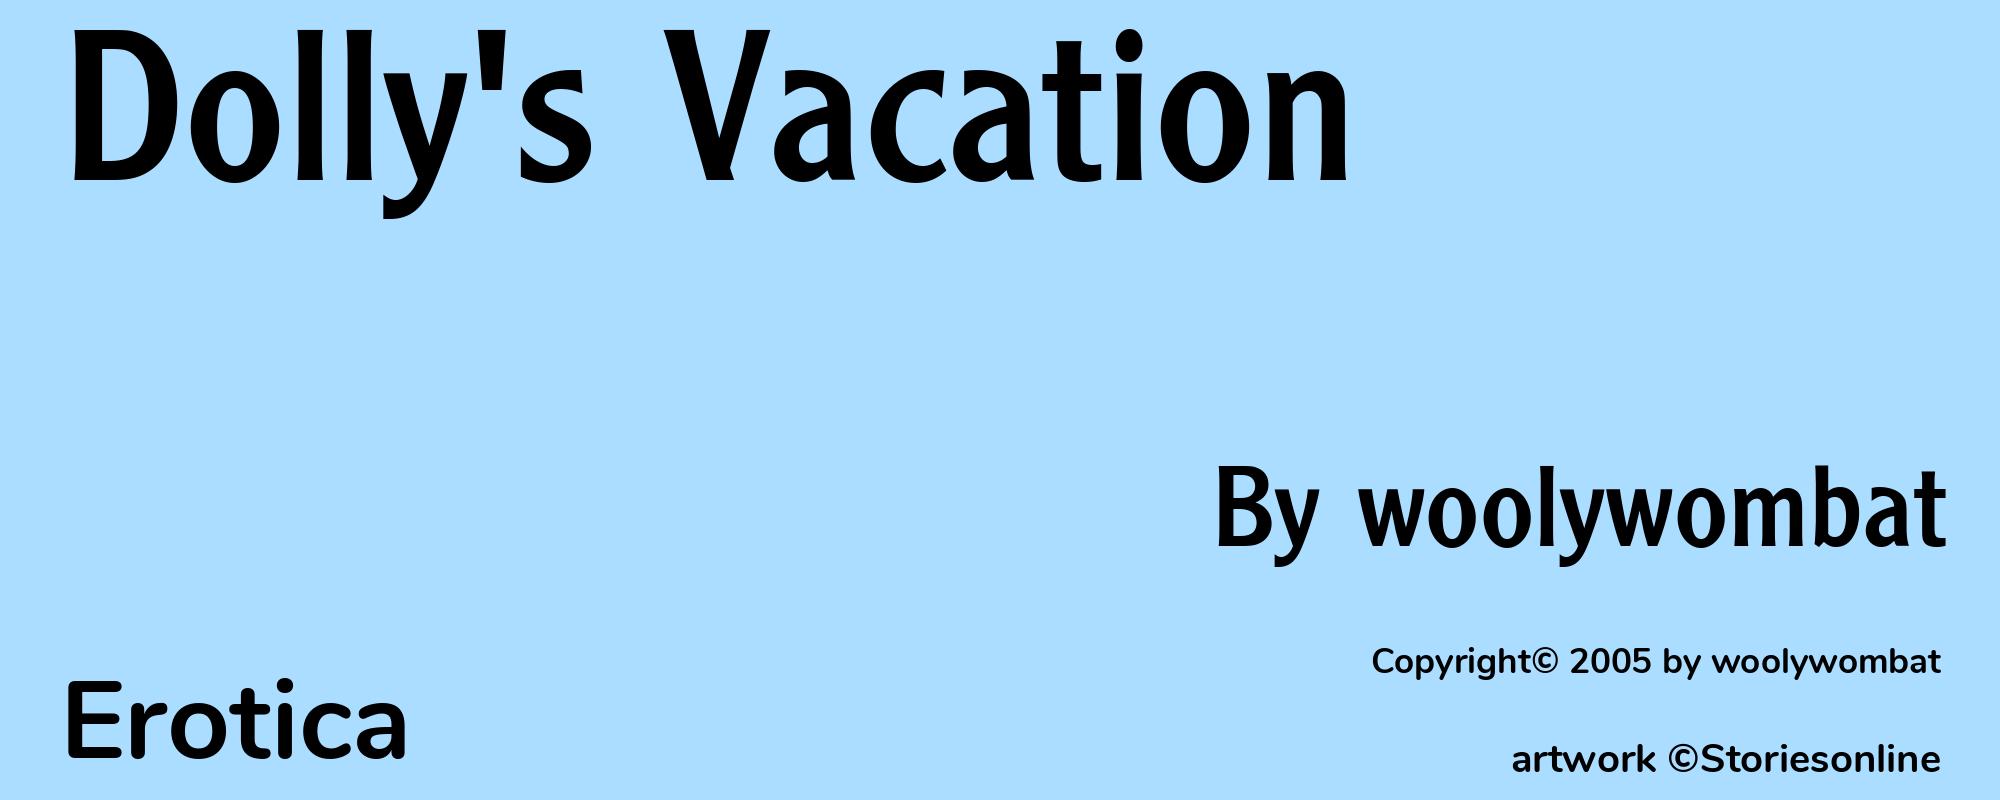 Dolly's Vacation - Cover